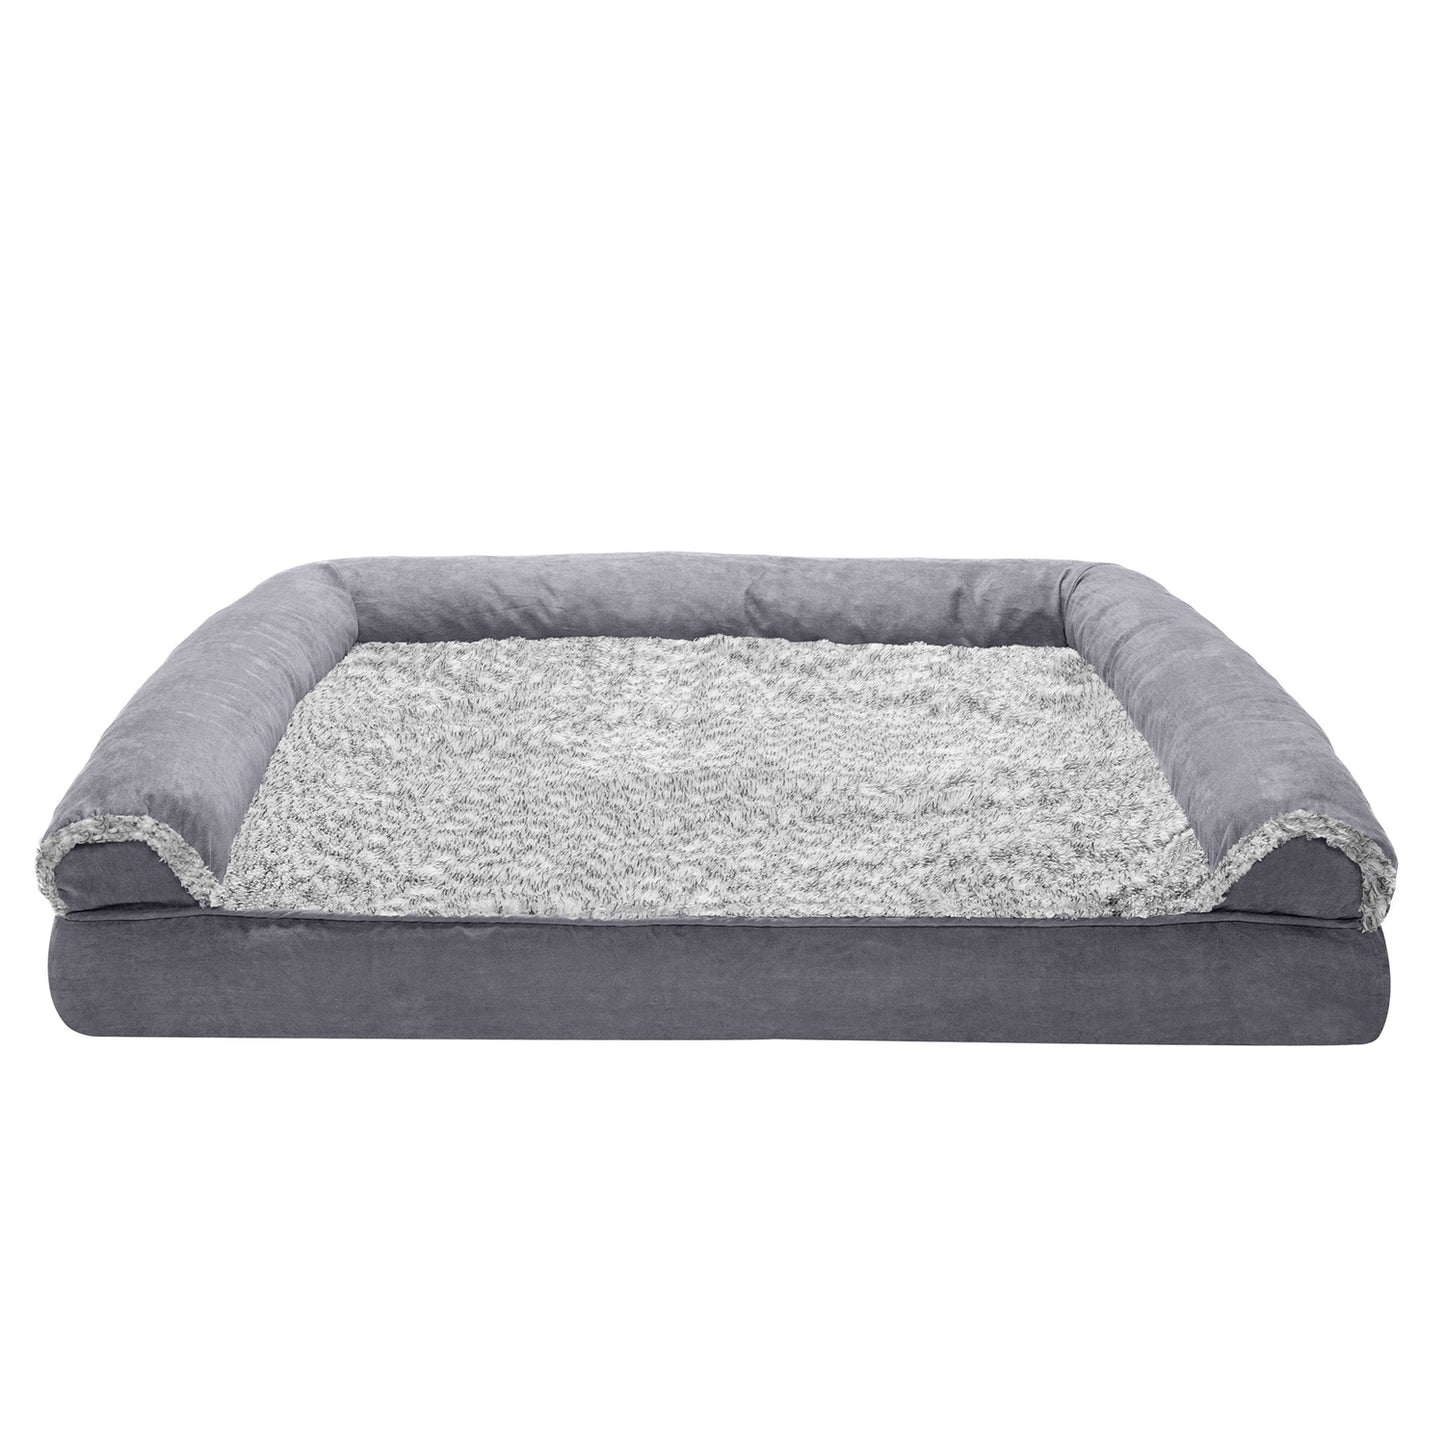 Furhaven Pet Products Full Support Orthopedic Two-Tone Faux Fur & Suede Sofa Pet Bed for Dogs & Cats, Stone Gray, Jumbo